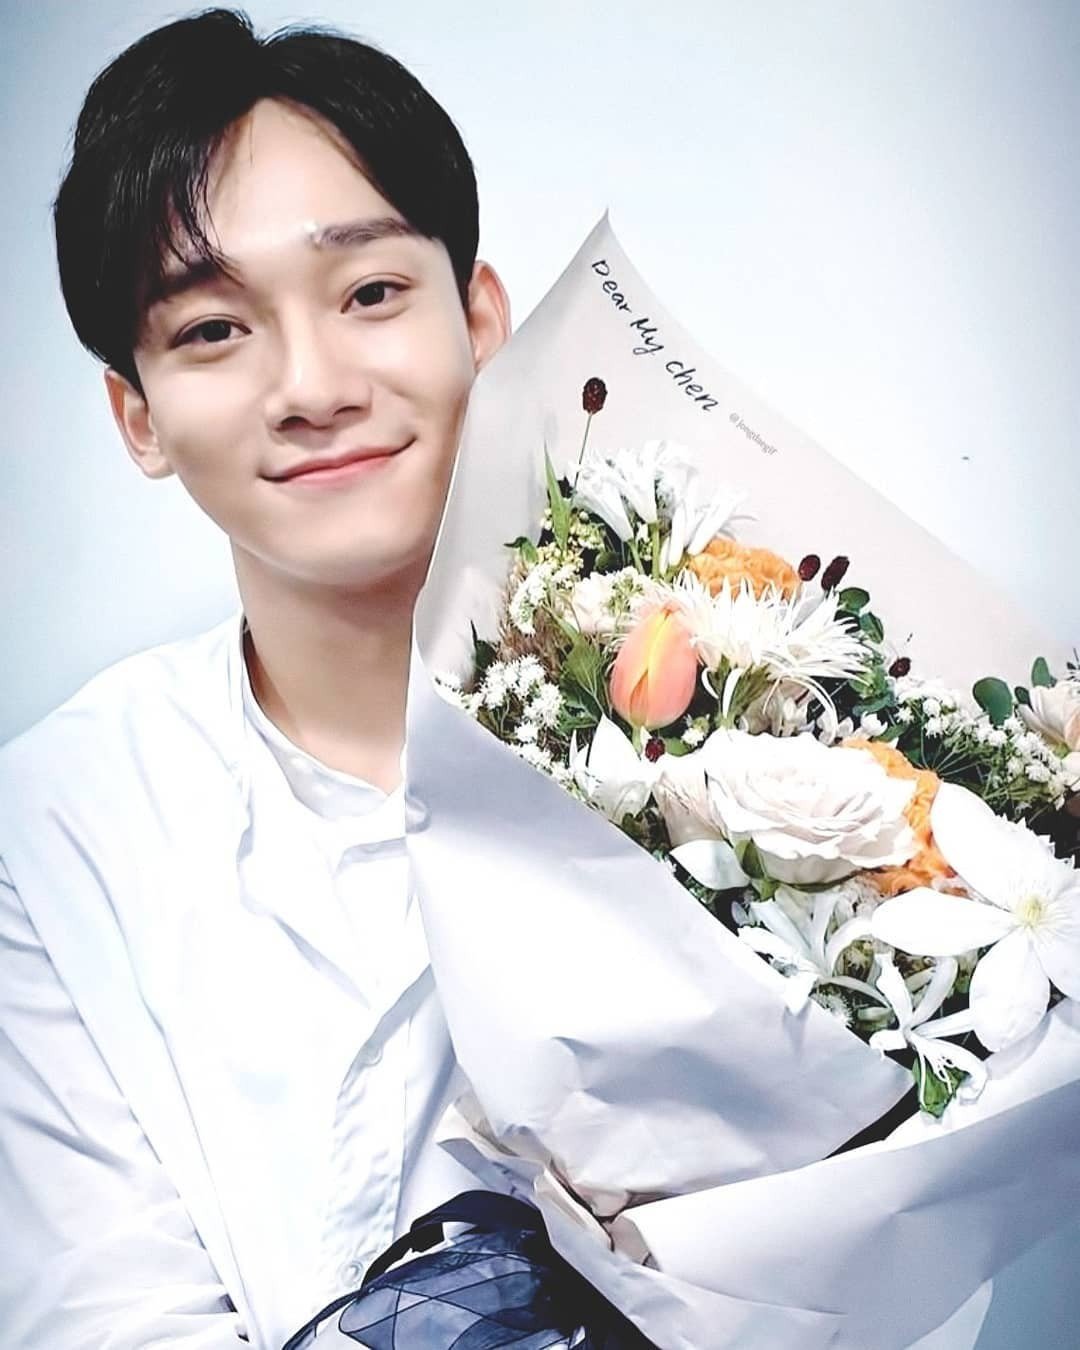 Kim Jong-dae, otherwise known as Chen, has announced a surprise engagement – but who is the lucky girl? Photo: Instagram